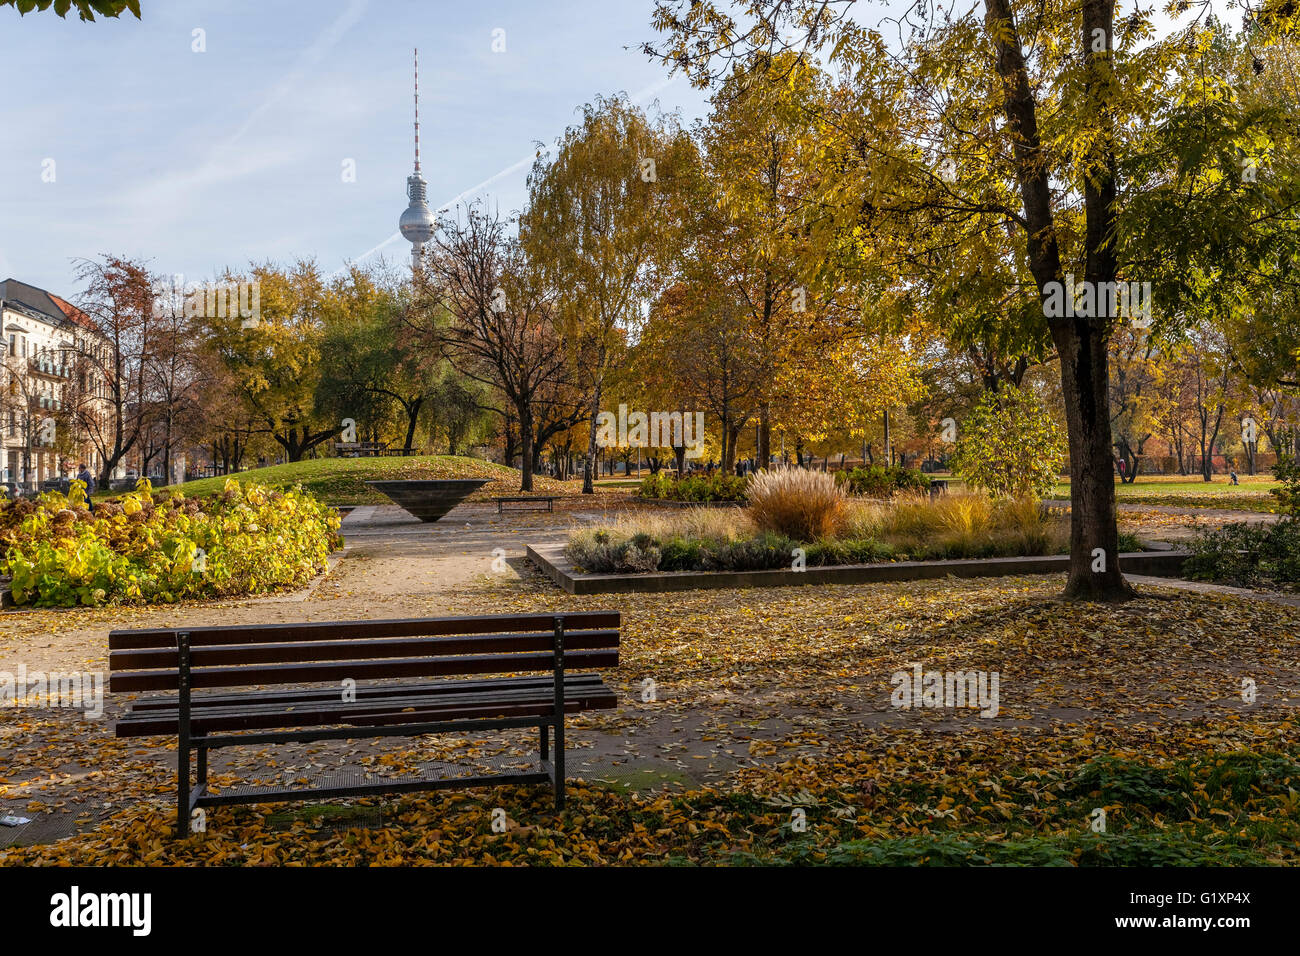 Bench in Monbijoupark in Berlin with Berliner Fernsehturm TV tower on the backgrond. Stock Photo